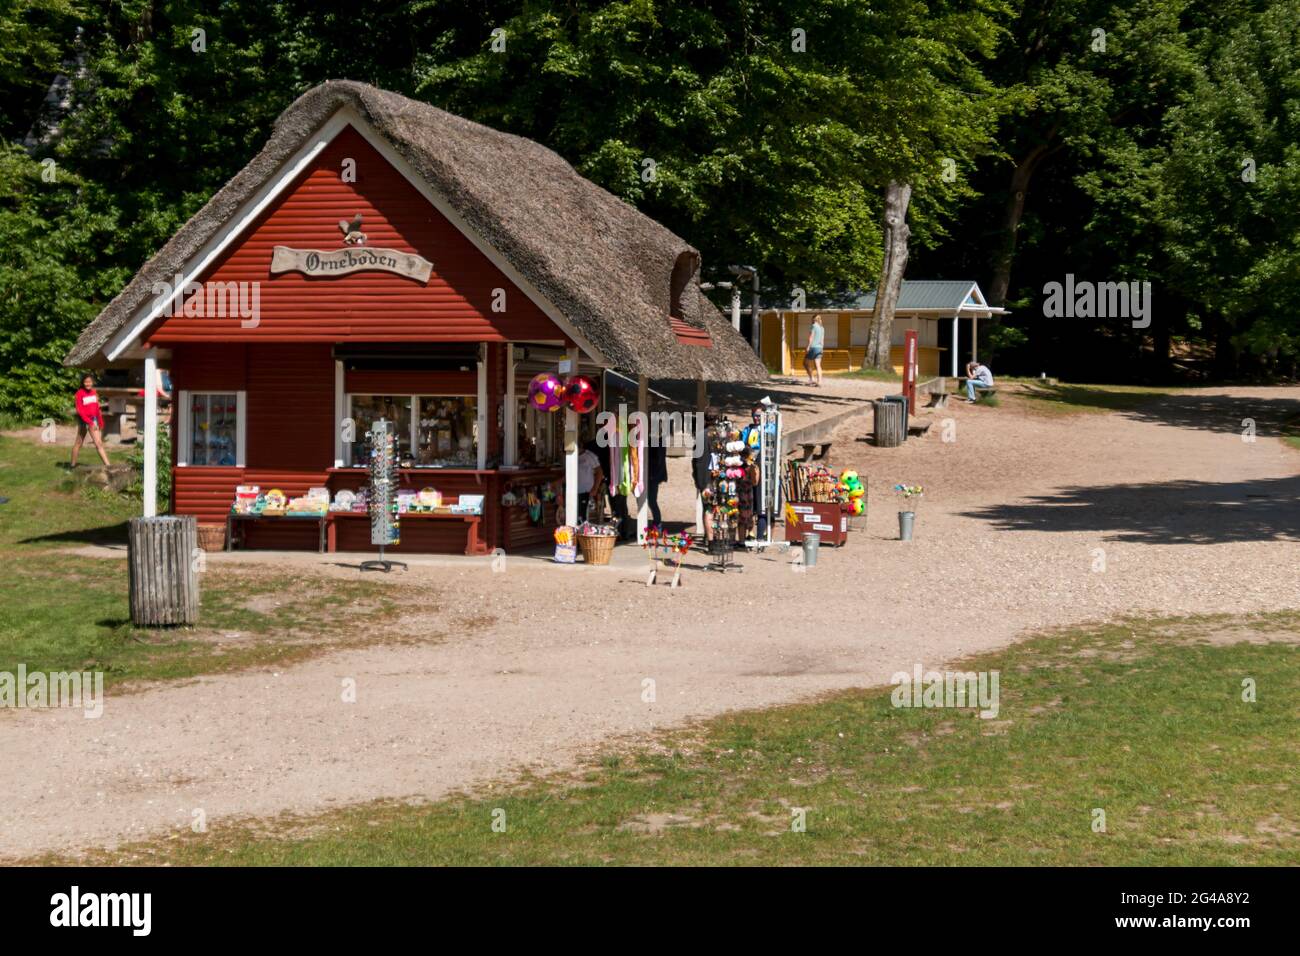 Ry, Denmark - June 16 2021: Grass area around Himmelbjerget near Silkeborg, Many people enjoy the good weather and picnics. The kiosk with souvenirs c Stock Photo